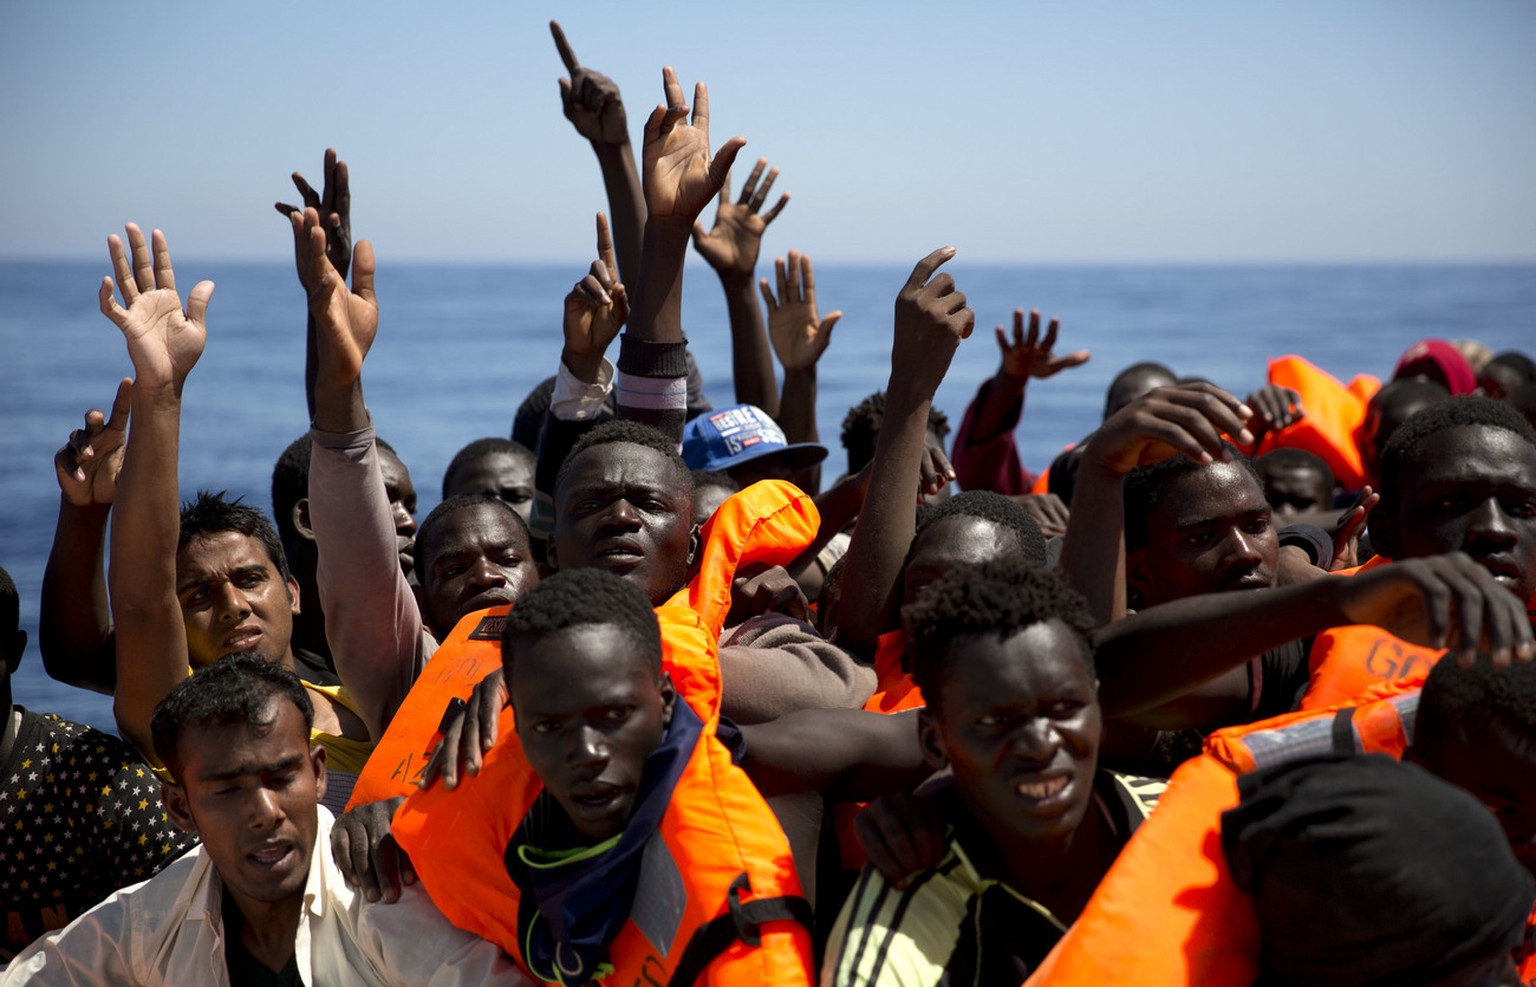 Migrants and refugees raise their hands as they try to reach life vests distributed by Spanish NGO Proactiva Open Arms workers, after being located out of control sailing on a rubber boat in the Medit ...